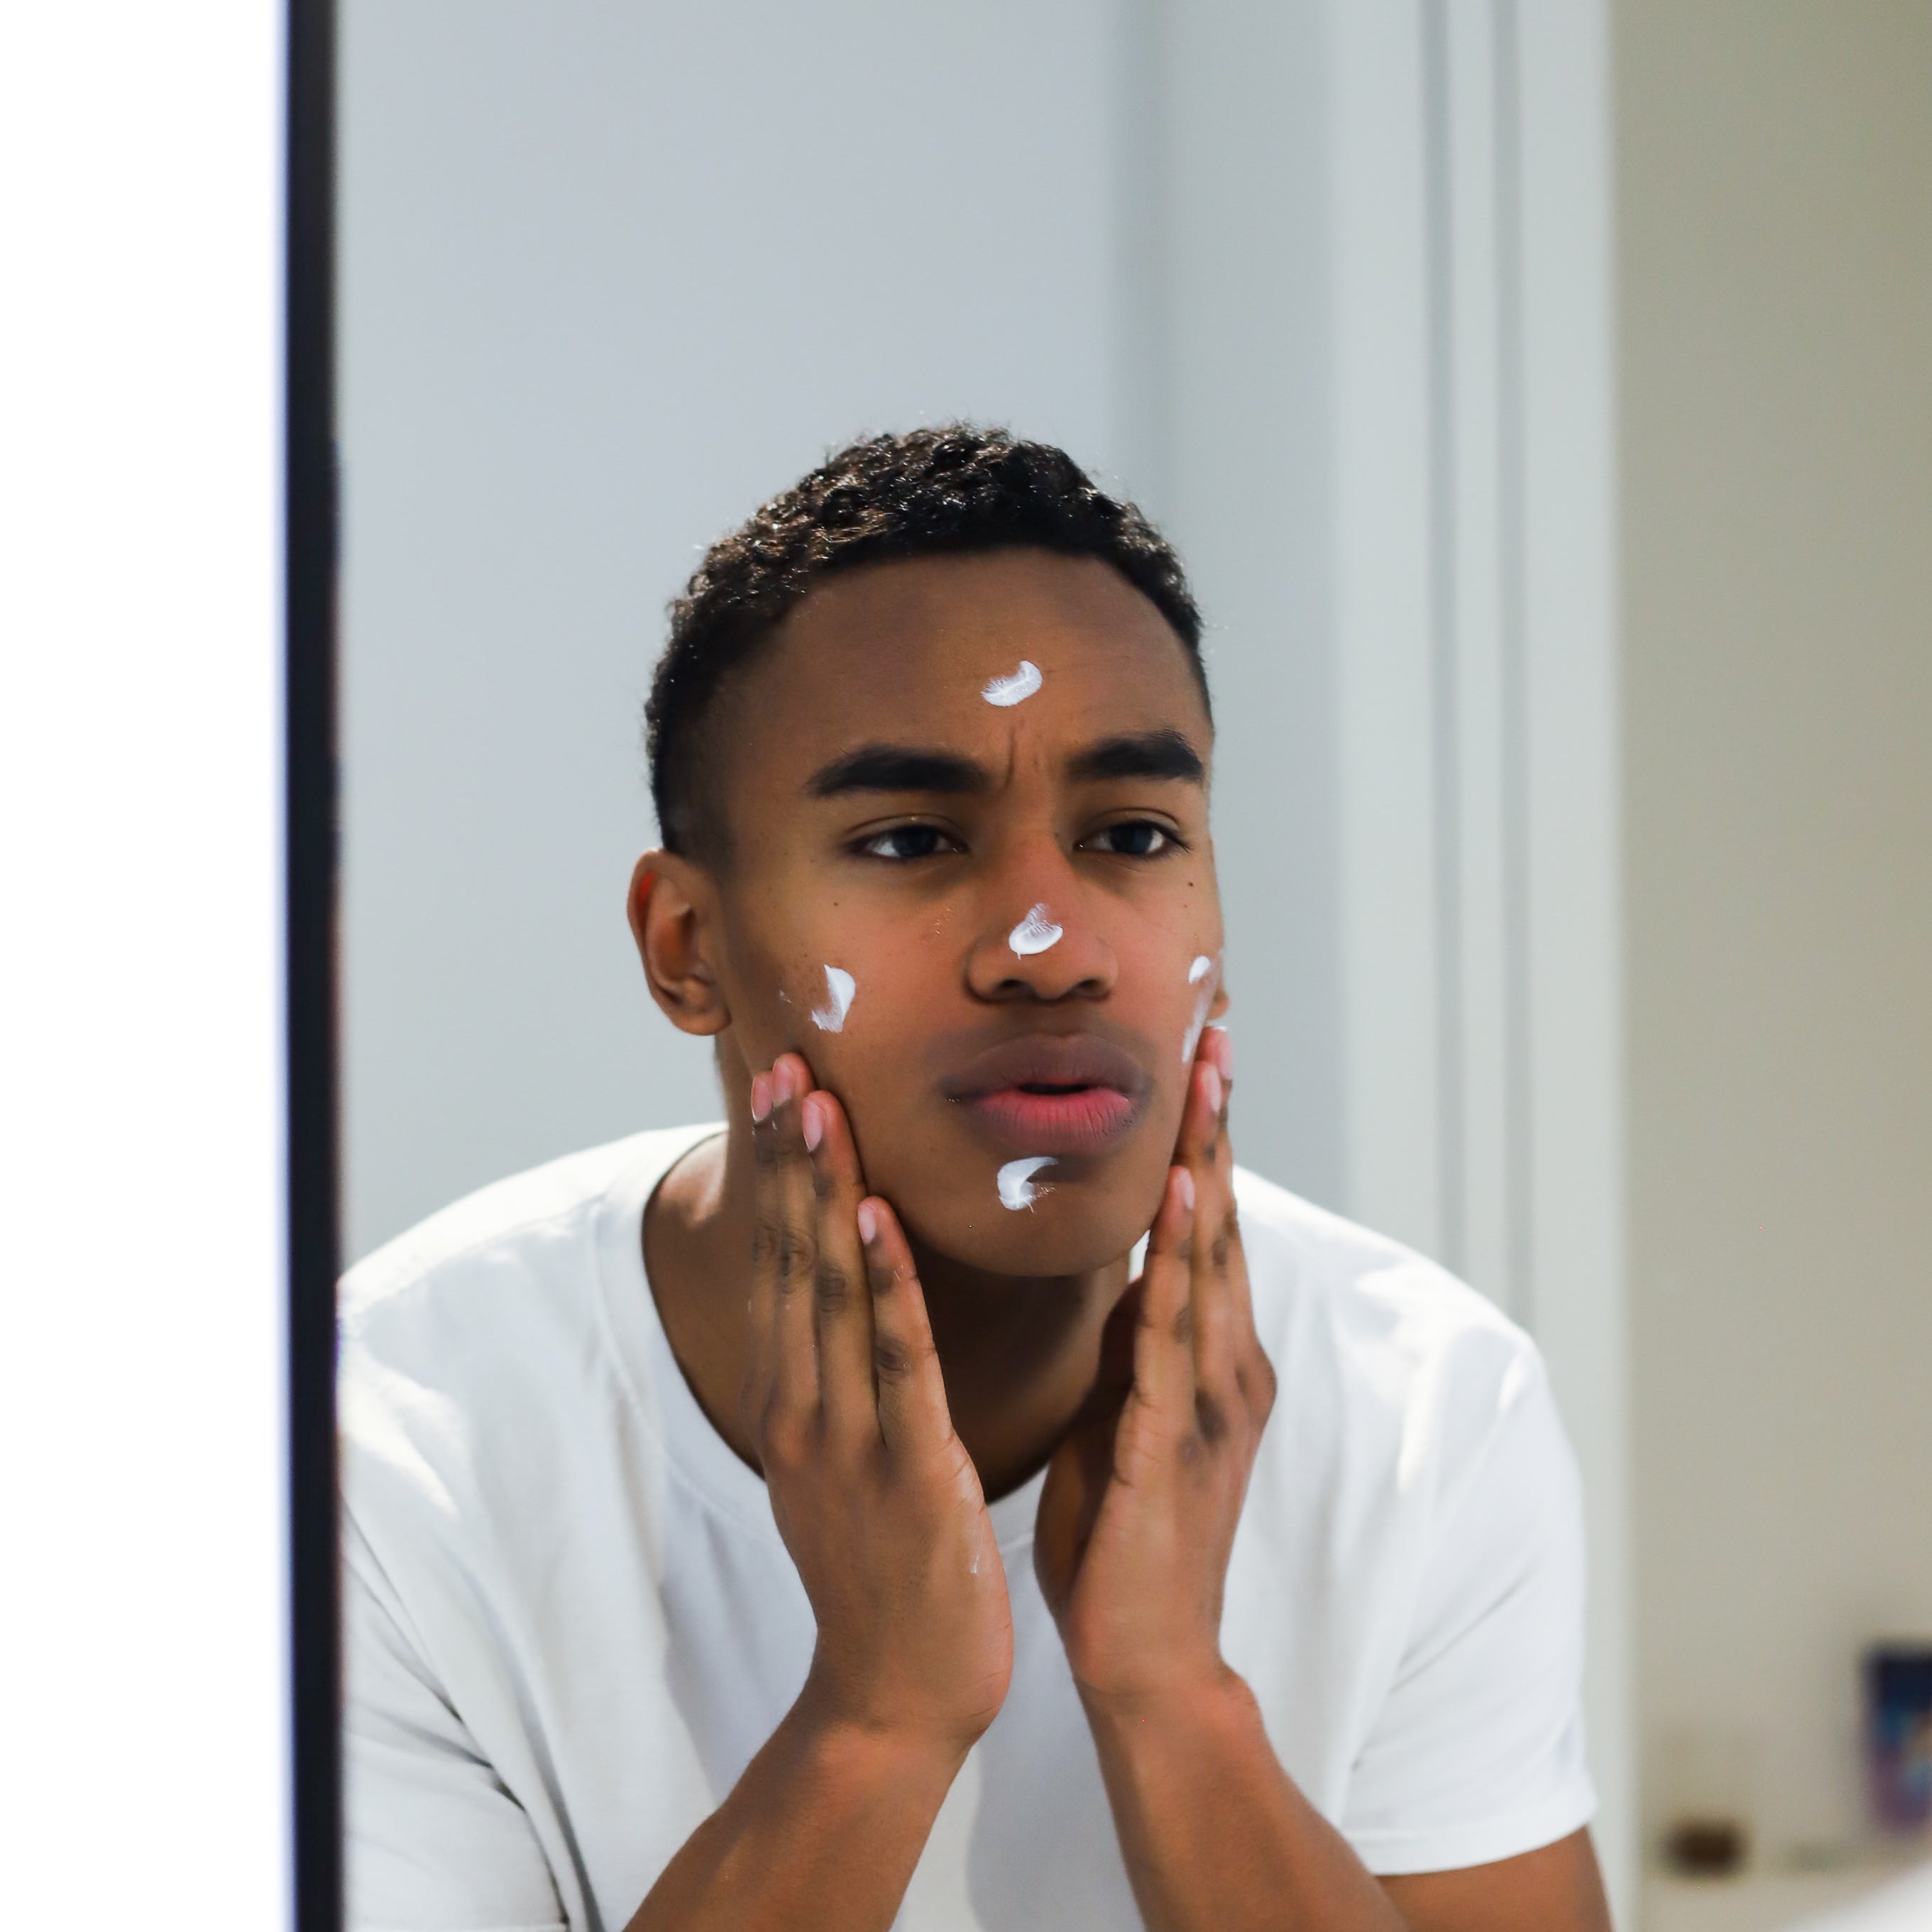 Skincare for men: How men's skin is different from women's and how to care for it properly.